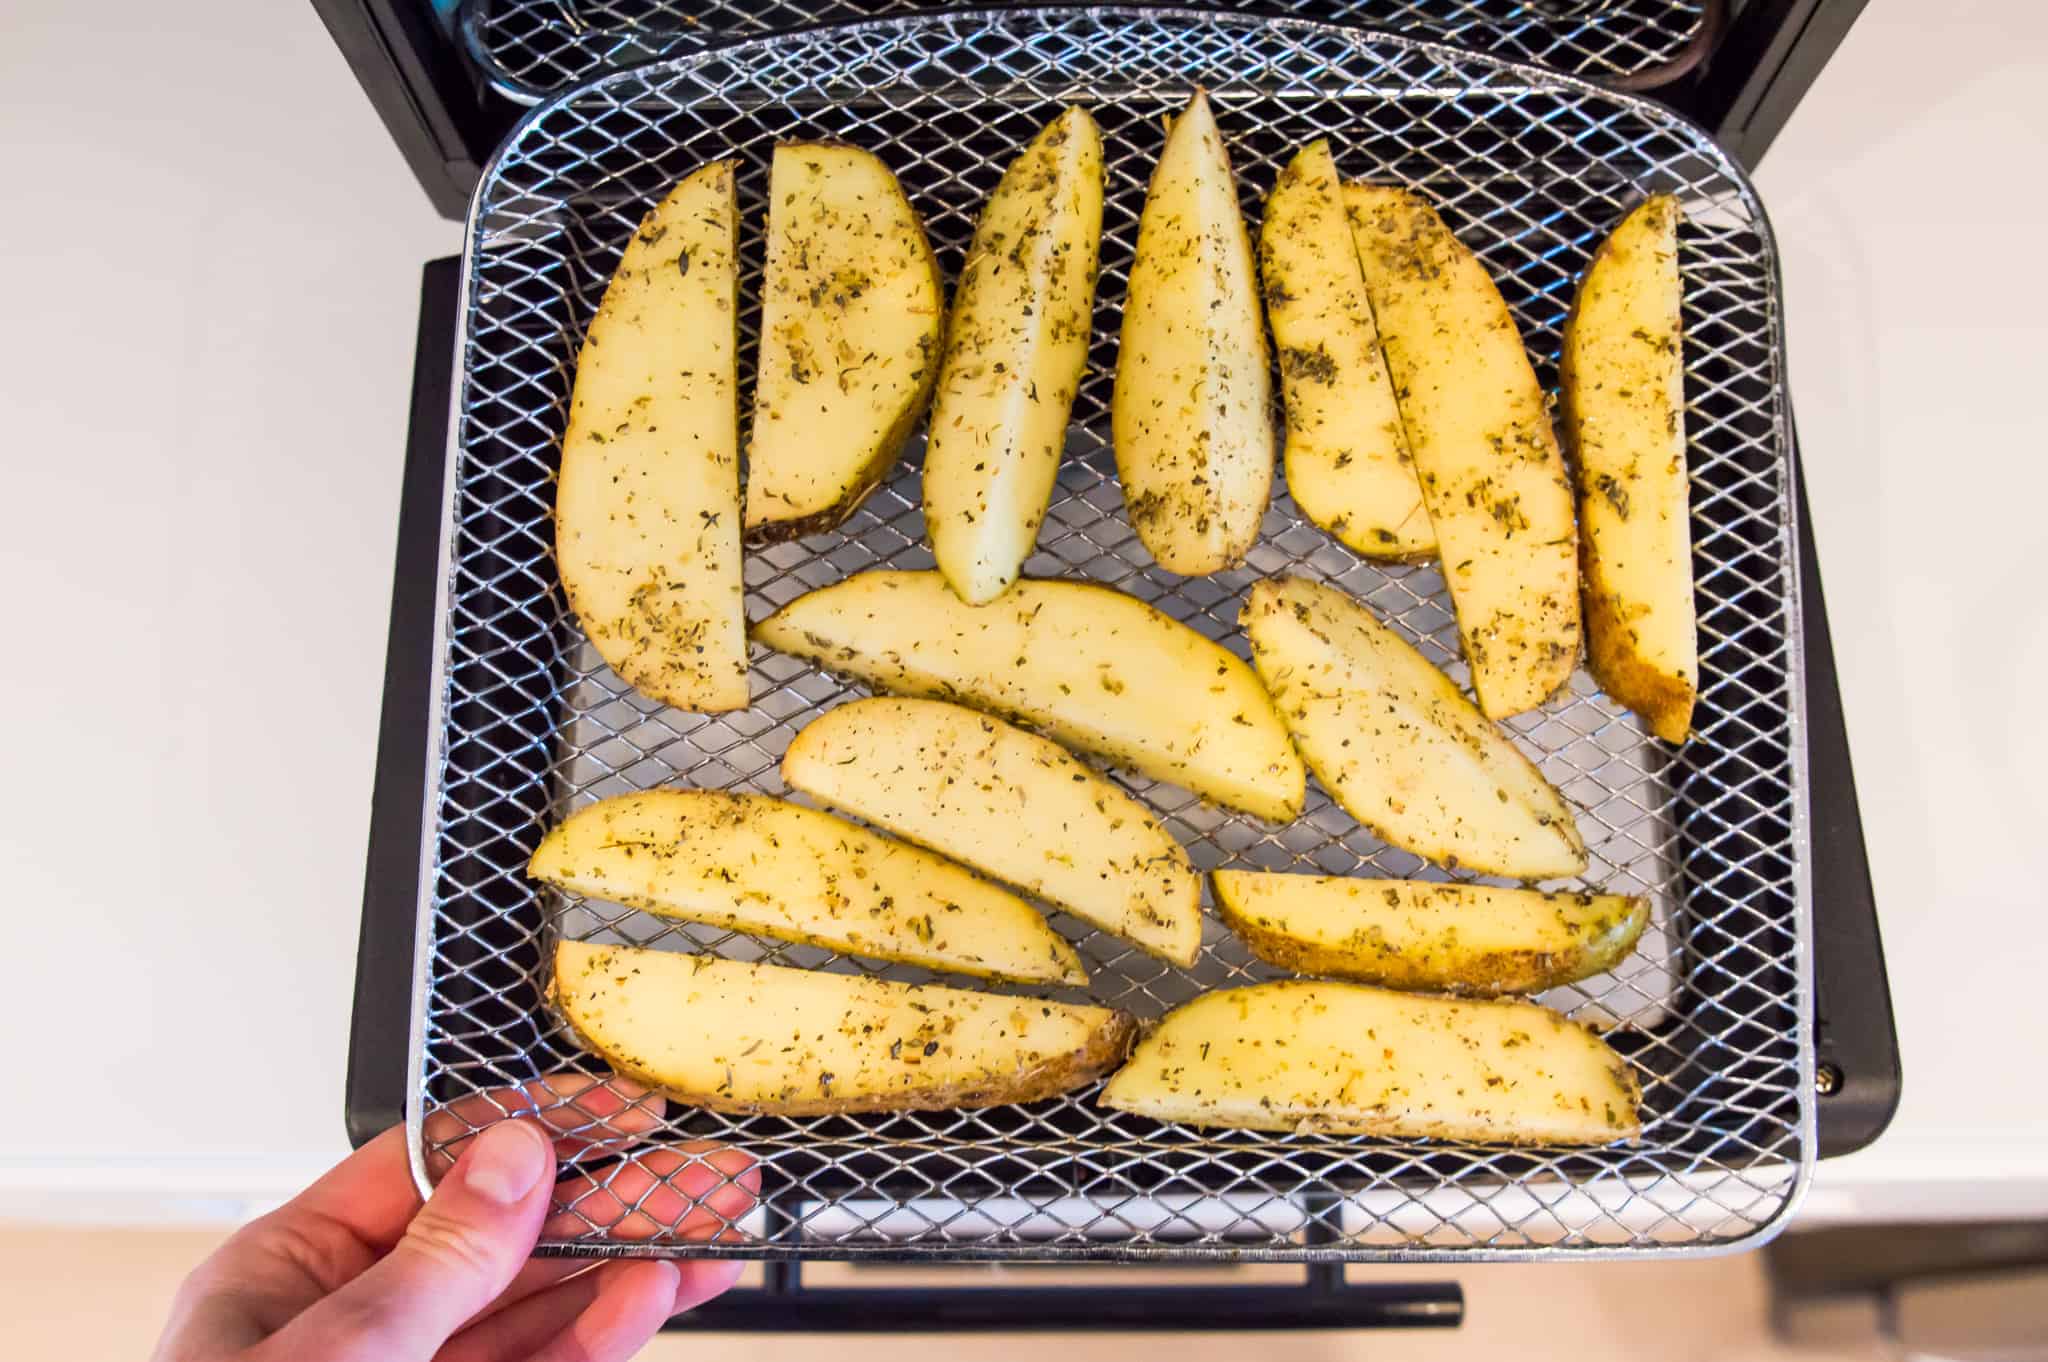 Sliced potatoes on an air fryer tray.